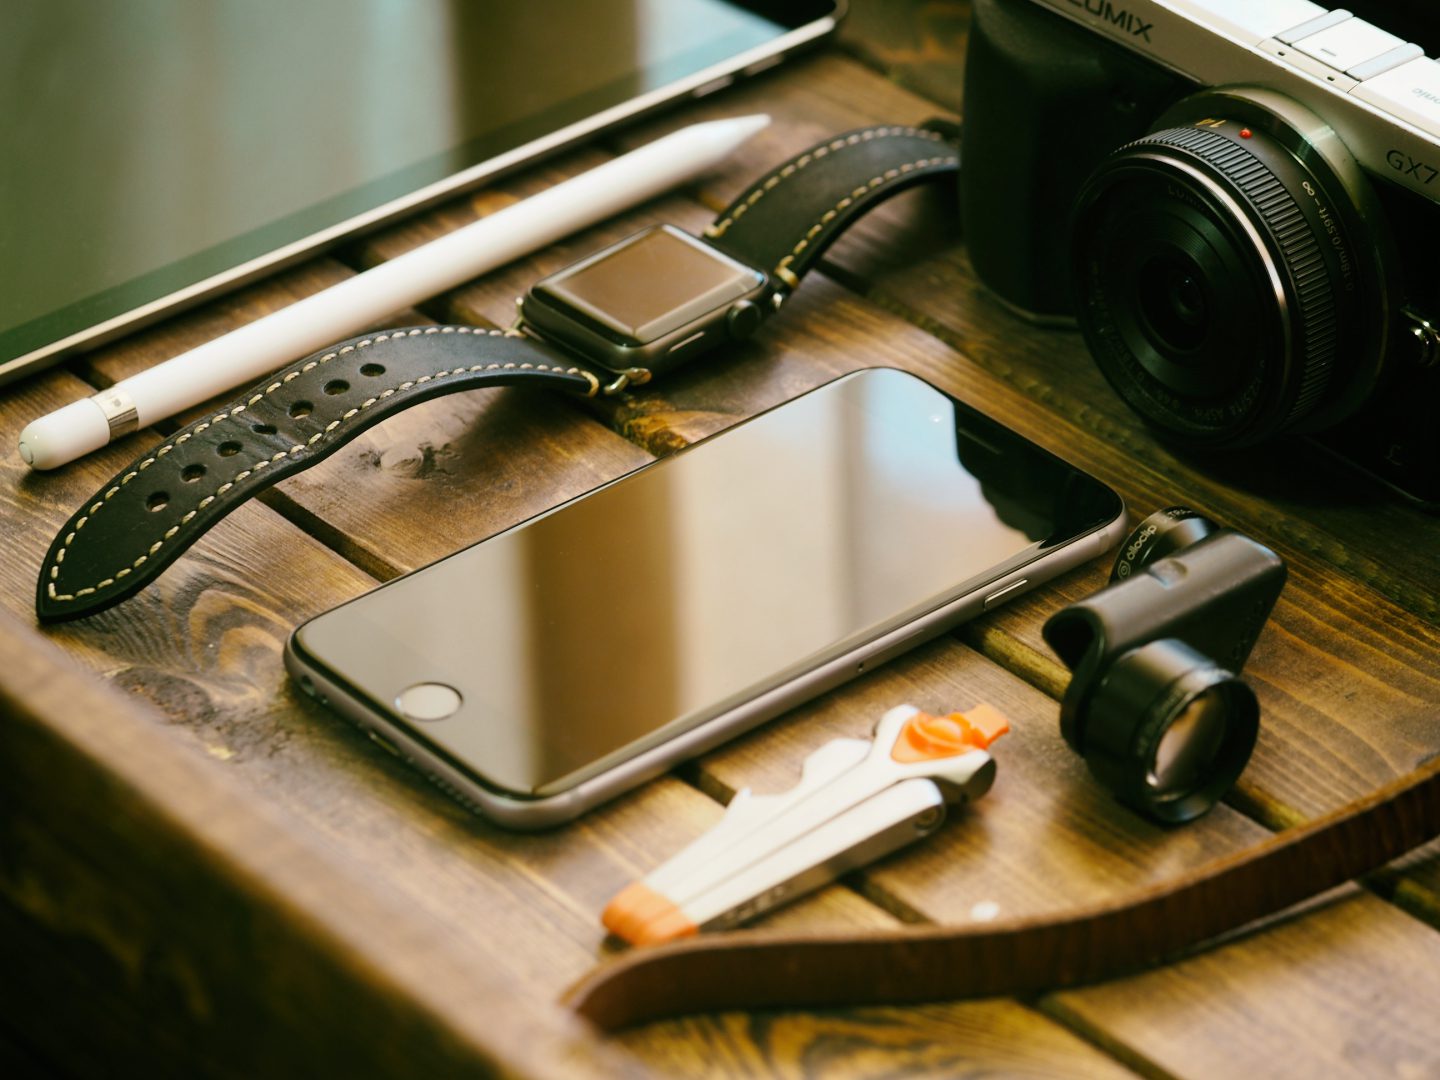 Tech Accessories Sales Through Images - A Marketer's Guide